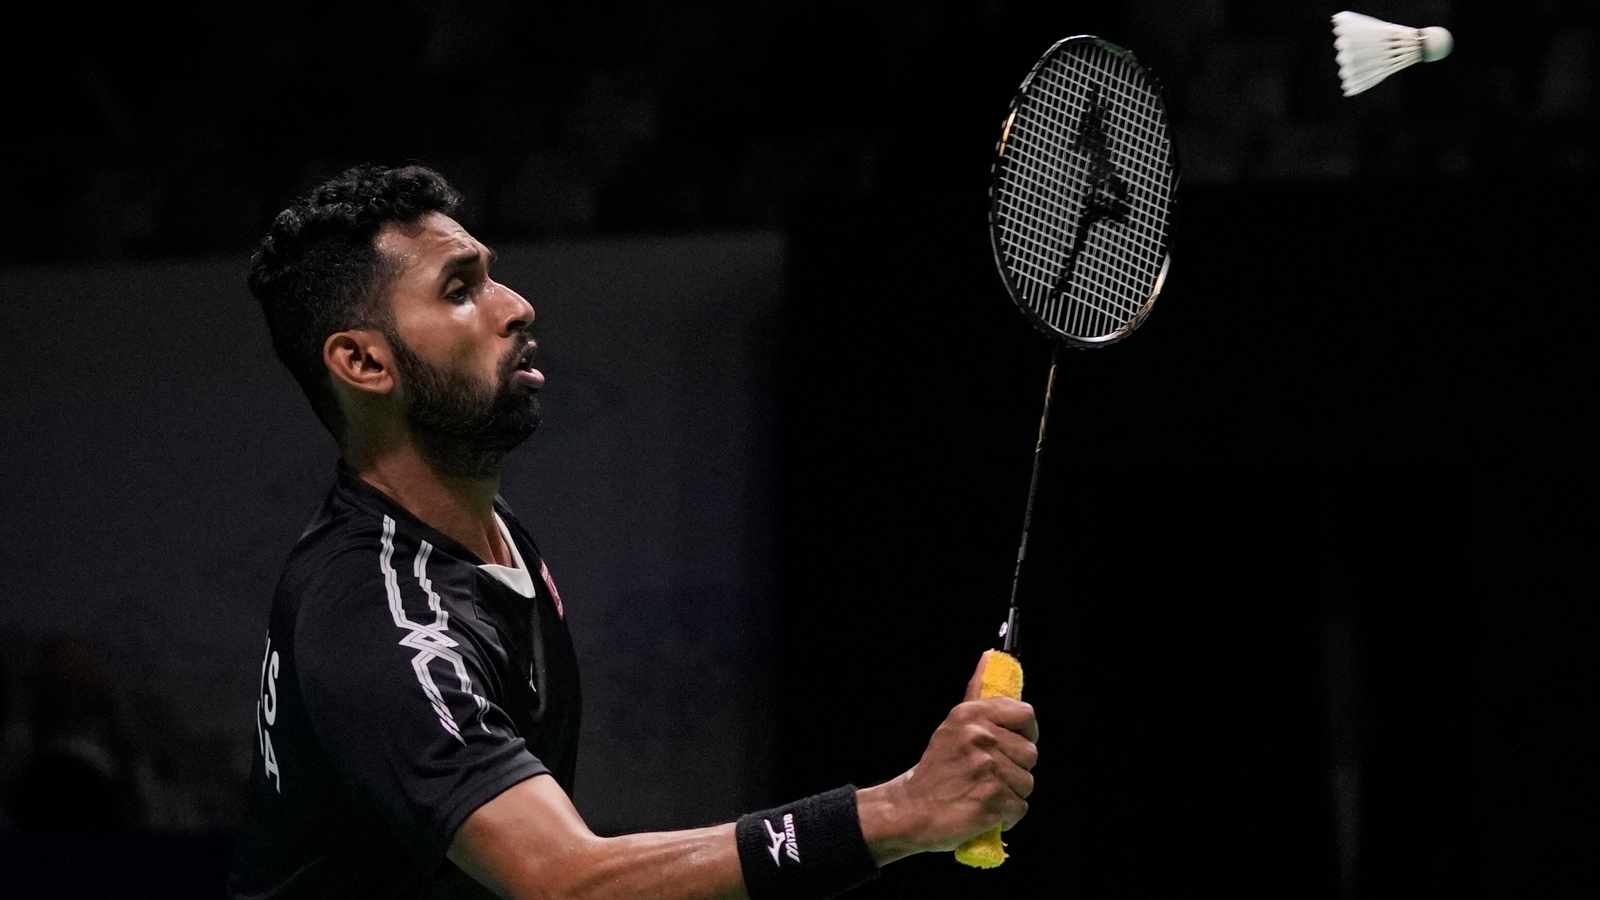 Indonesia Open 2022 Semi-final Highlights, HS Prannoy vs Zhao Jun Peng Prannoy suffers straight-game defeat Hindustan Times